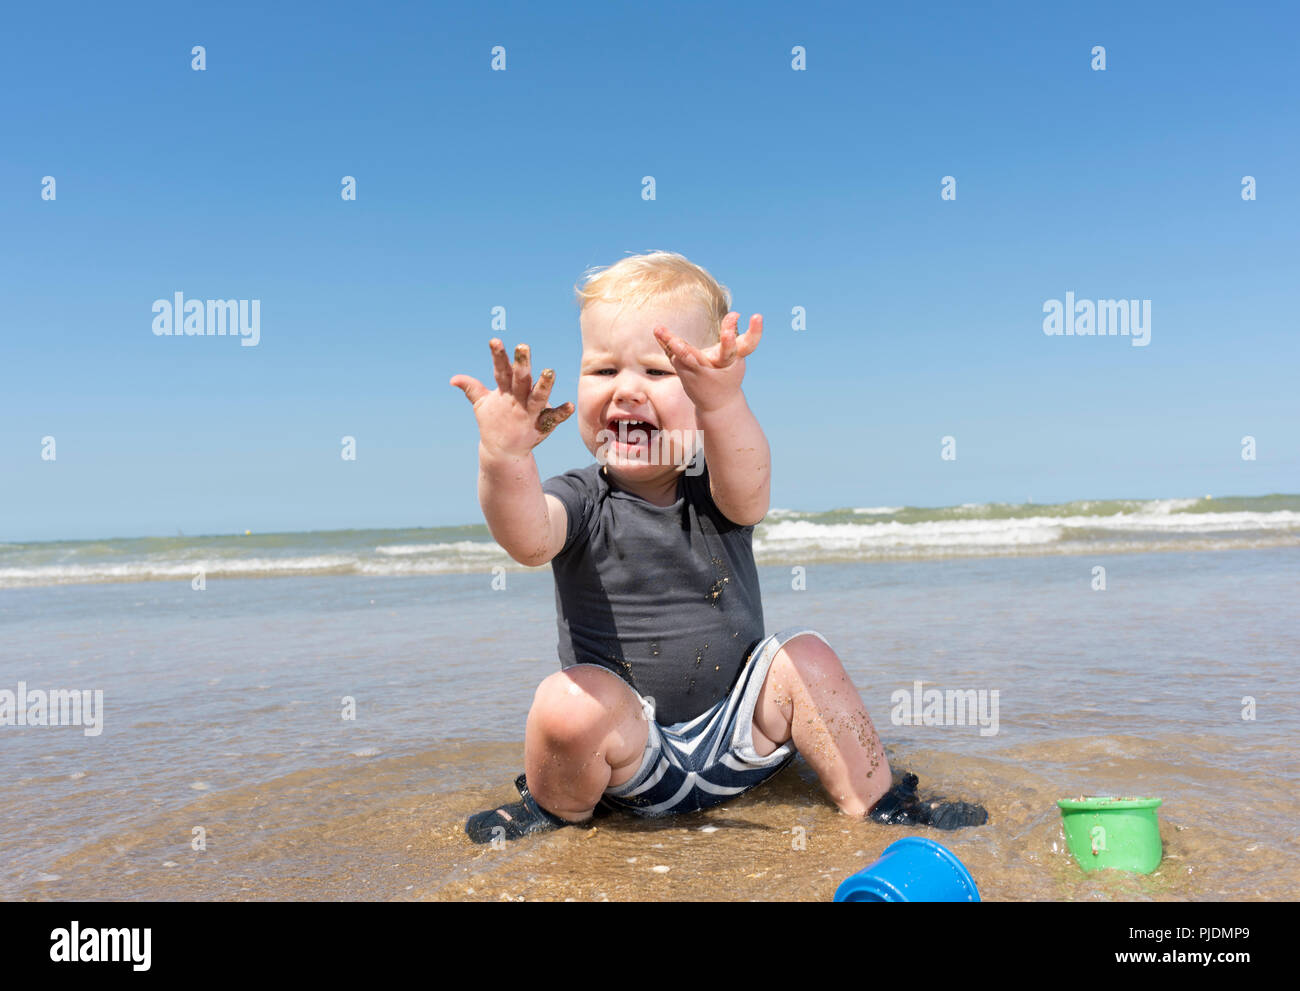 Toddler horrified with sea water on hands on beach Stock Photo